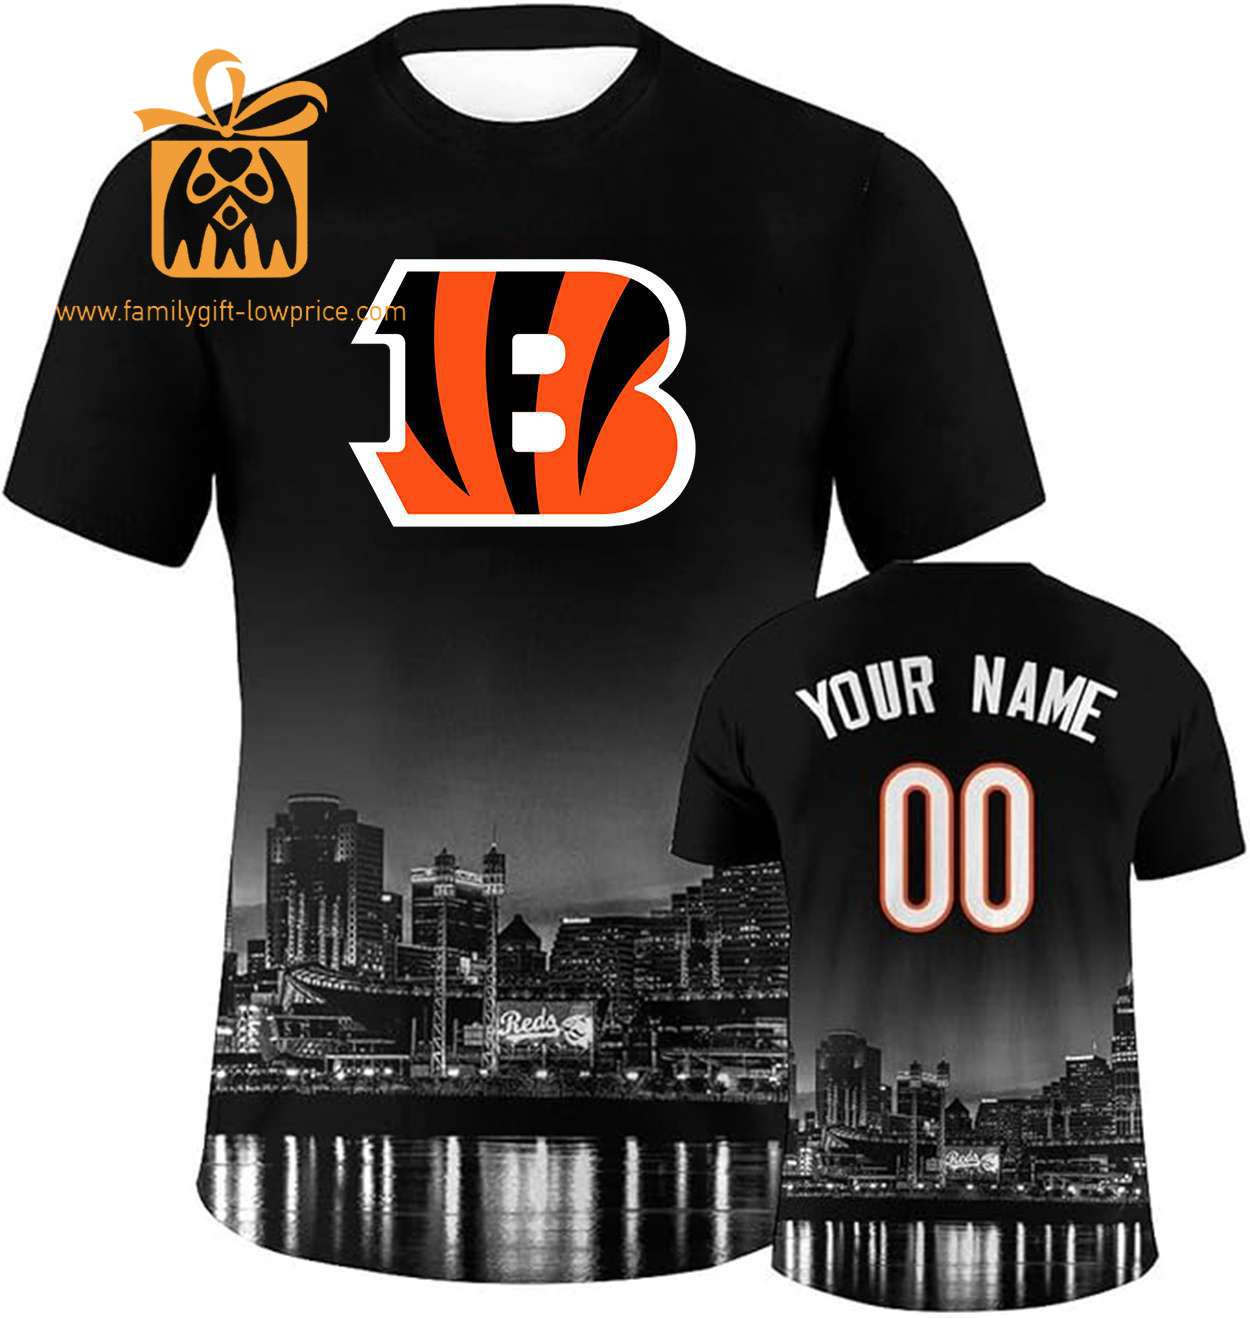 Cincinnati Bengals Custom Football Shirts – Personalized Name & Number, Ideal for Fans